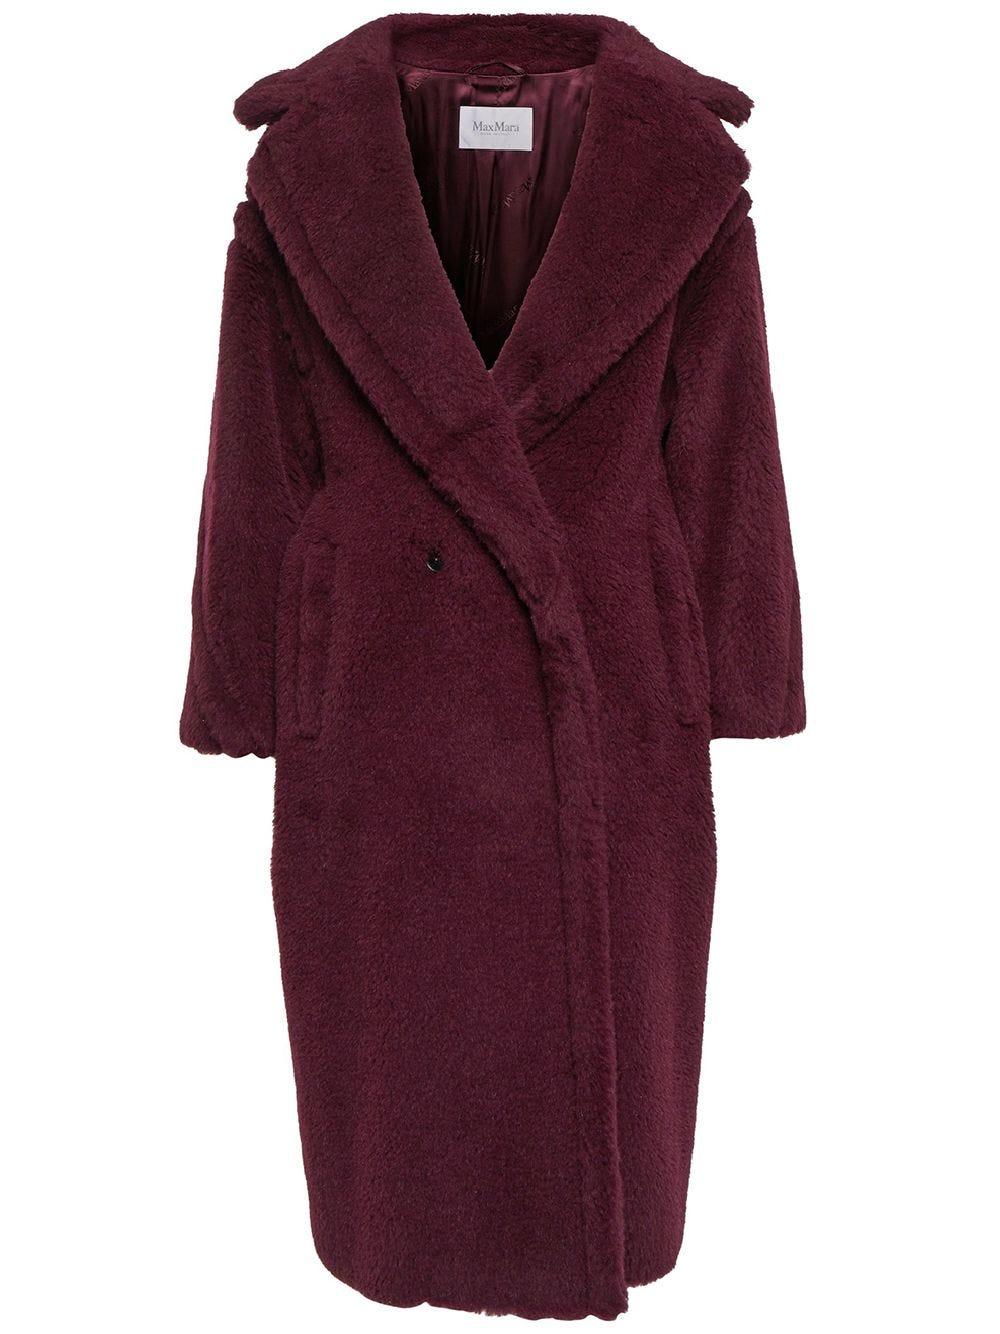 Max Mara Iconic 'tedgirl' Bodeaux Buttoned Coat in Purple | Lyst